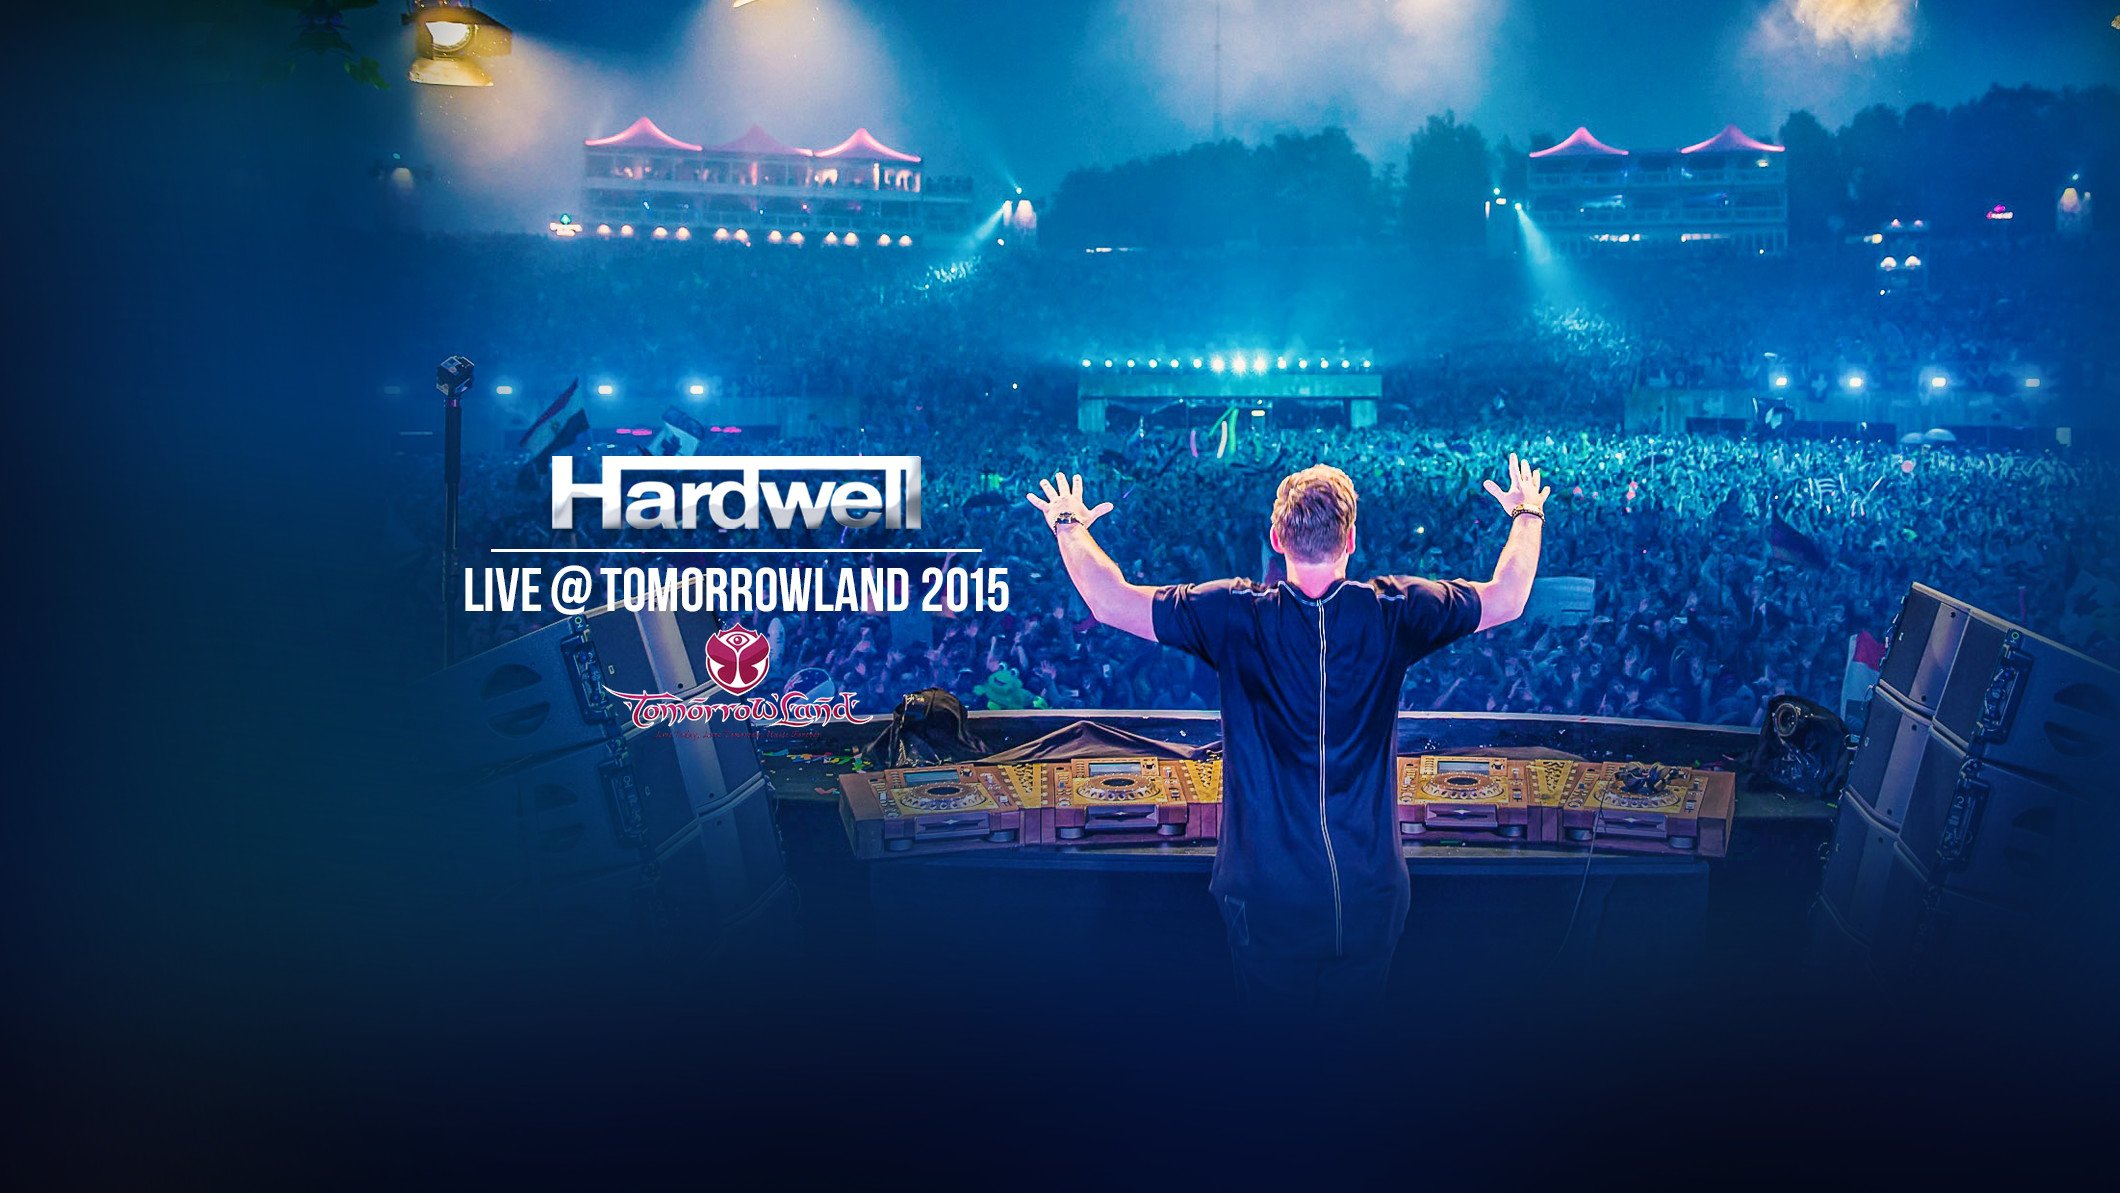 hardwell wallpaper,sky,performance,stage,font,event